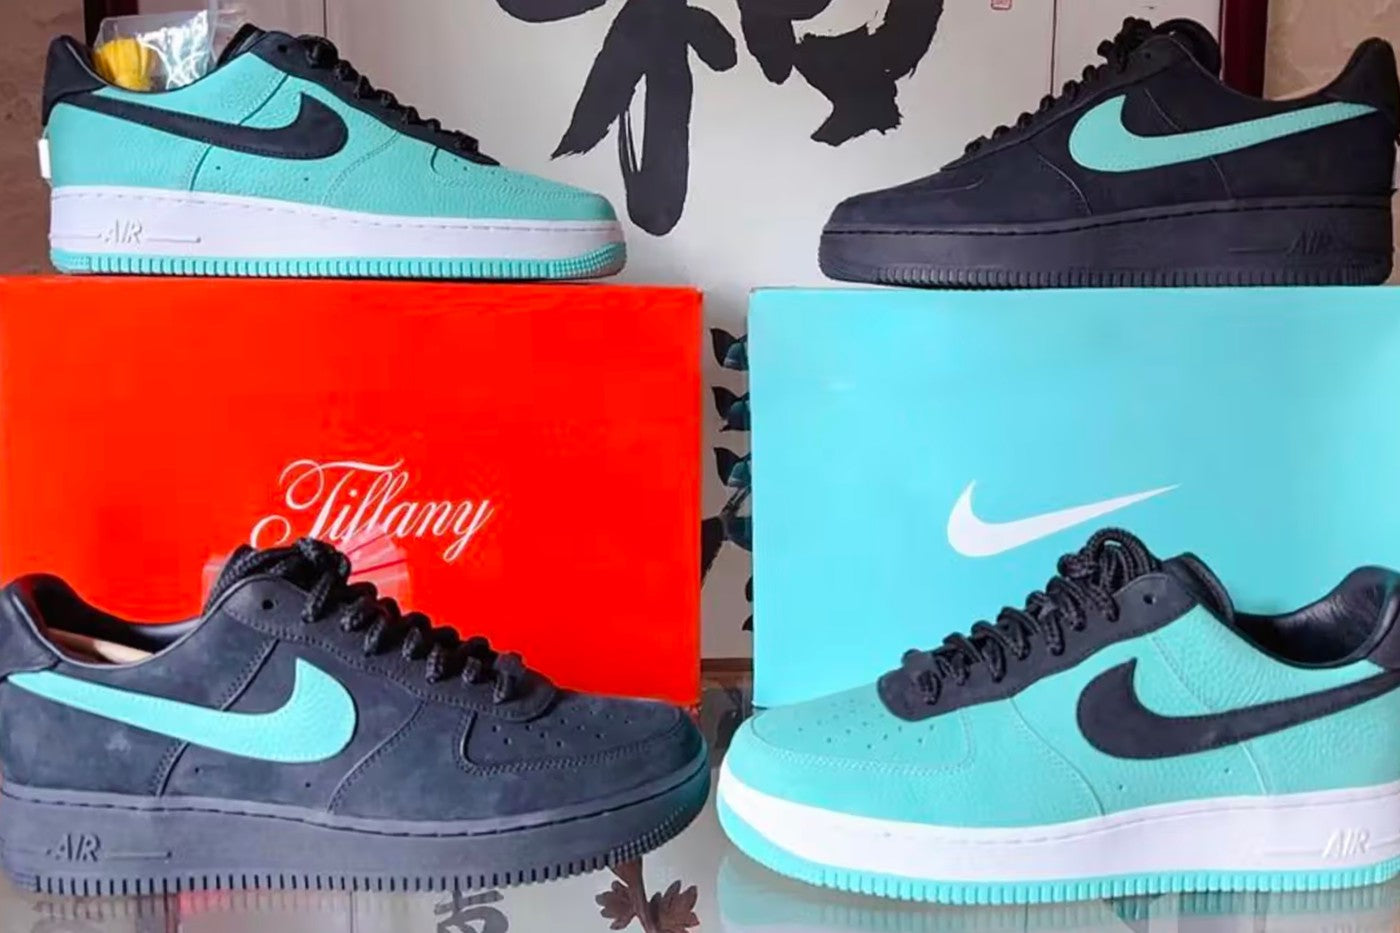 First Look at the Tiffany & Co. x Nike Air Force 1 "Reverse"